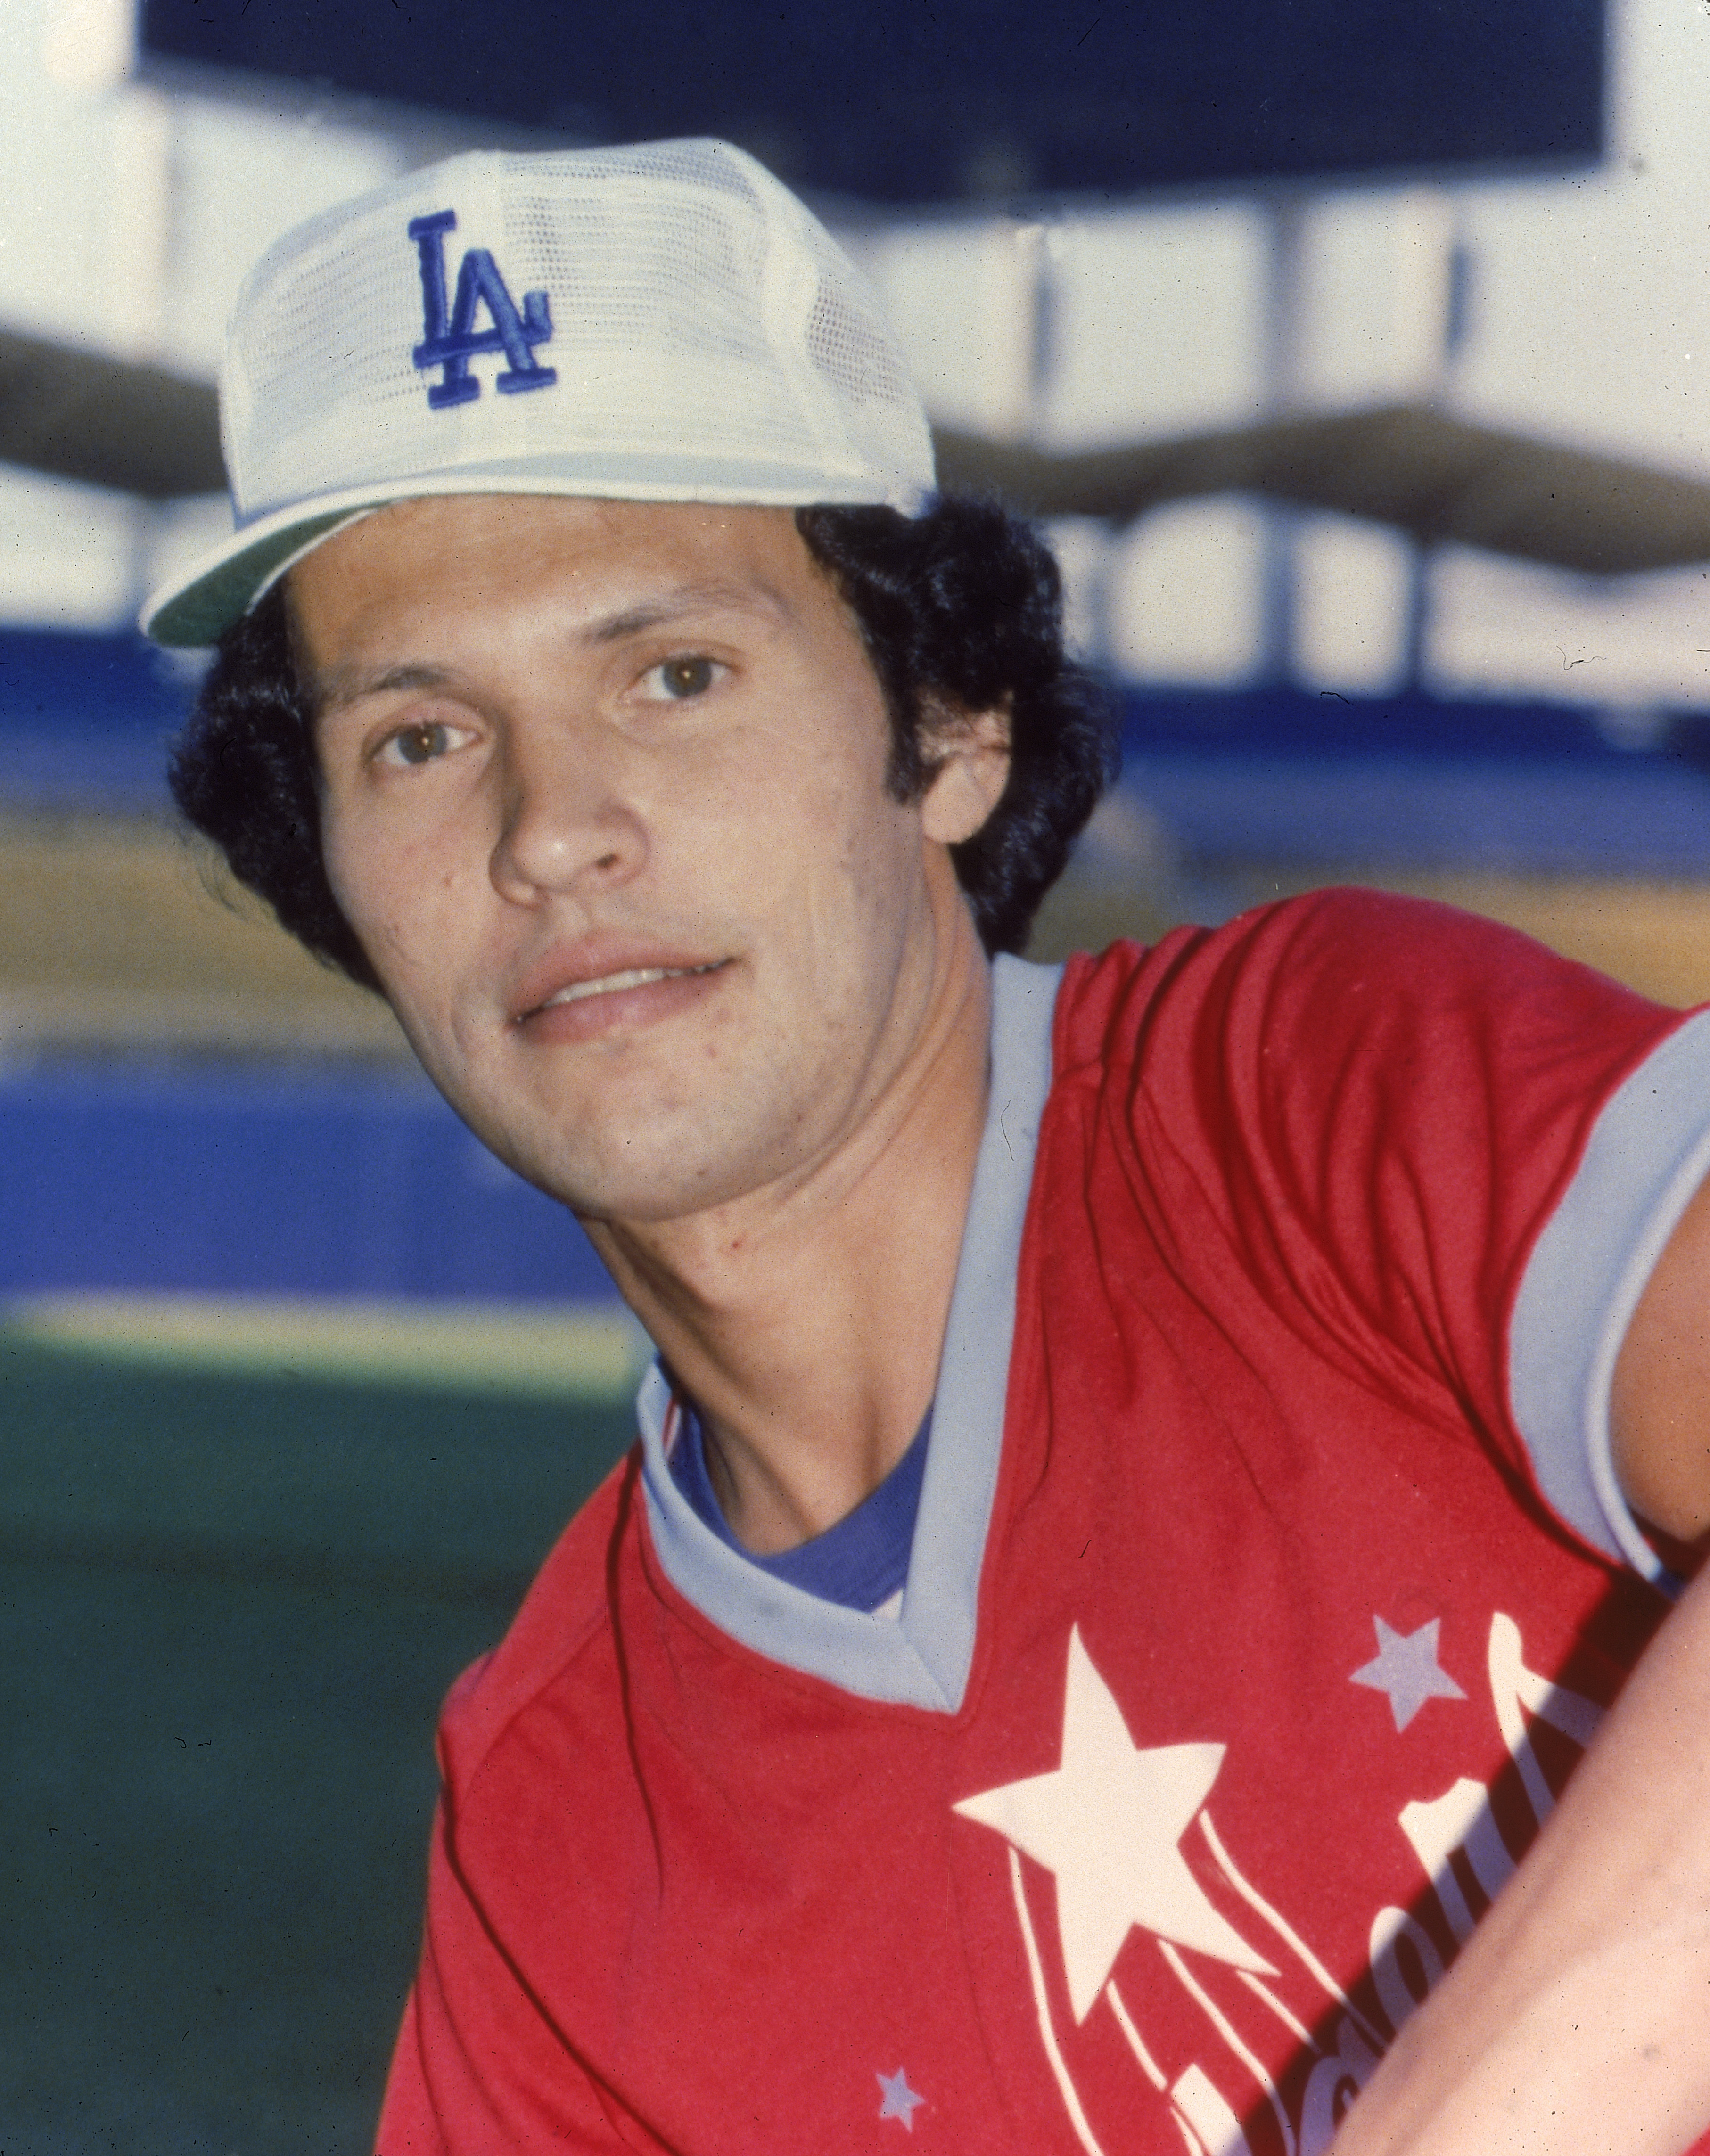 American actor and comedian Billy Crystal wears a Los Angeles baseball cap with a red baseball jersey in a sports stadium, 1980. | Source: Getty Images